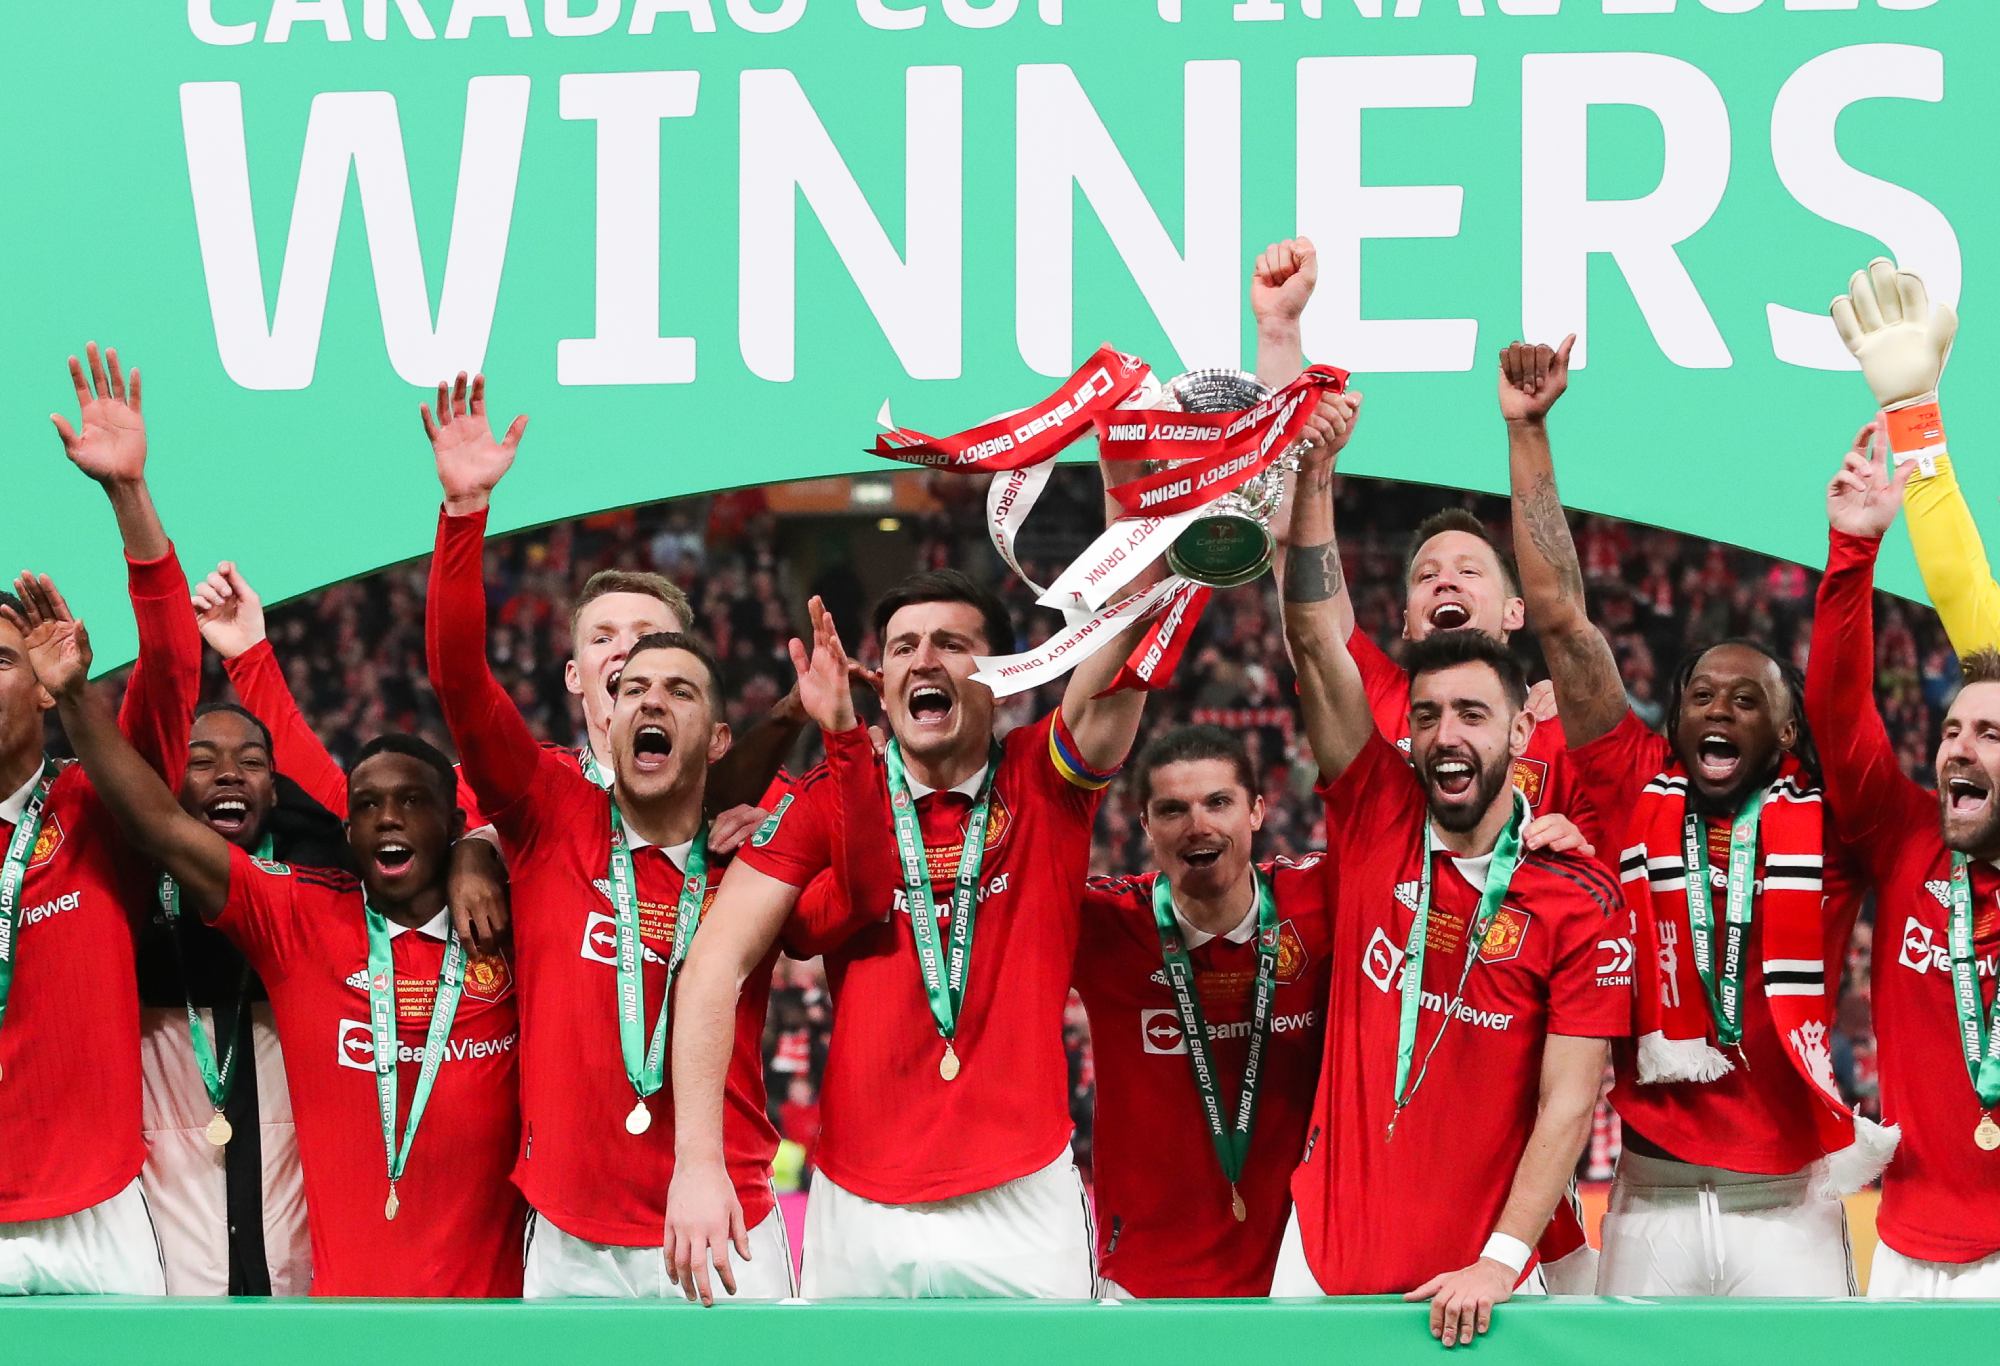 LONDON, ENGLAND - FEBRUARY 26: Manchester United players lift the Carabao Cup trophy after the Carabao Cup Final match between Manchester United and Newcastle United at Wembley Stadium on February 26, 2023 in London, England. (Photo by James Gill - Danehouse/Getty Images)